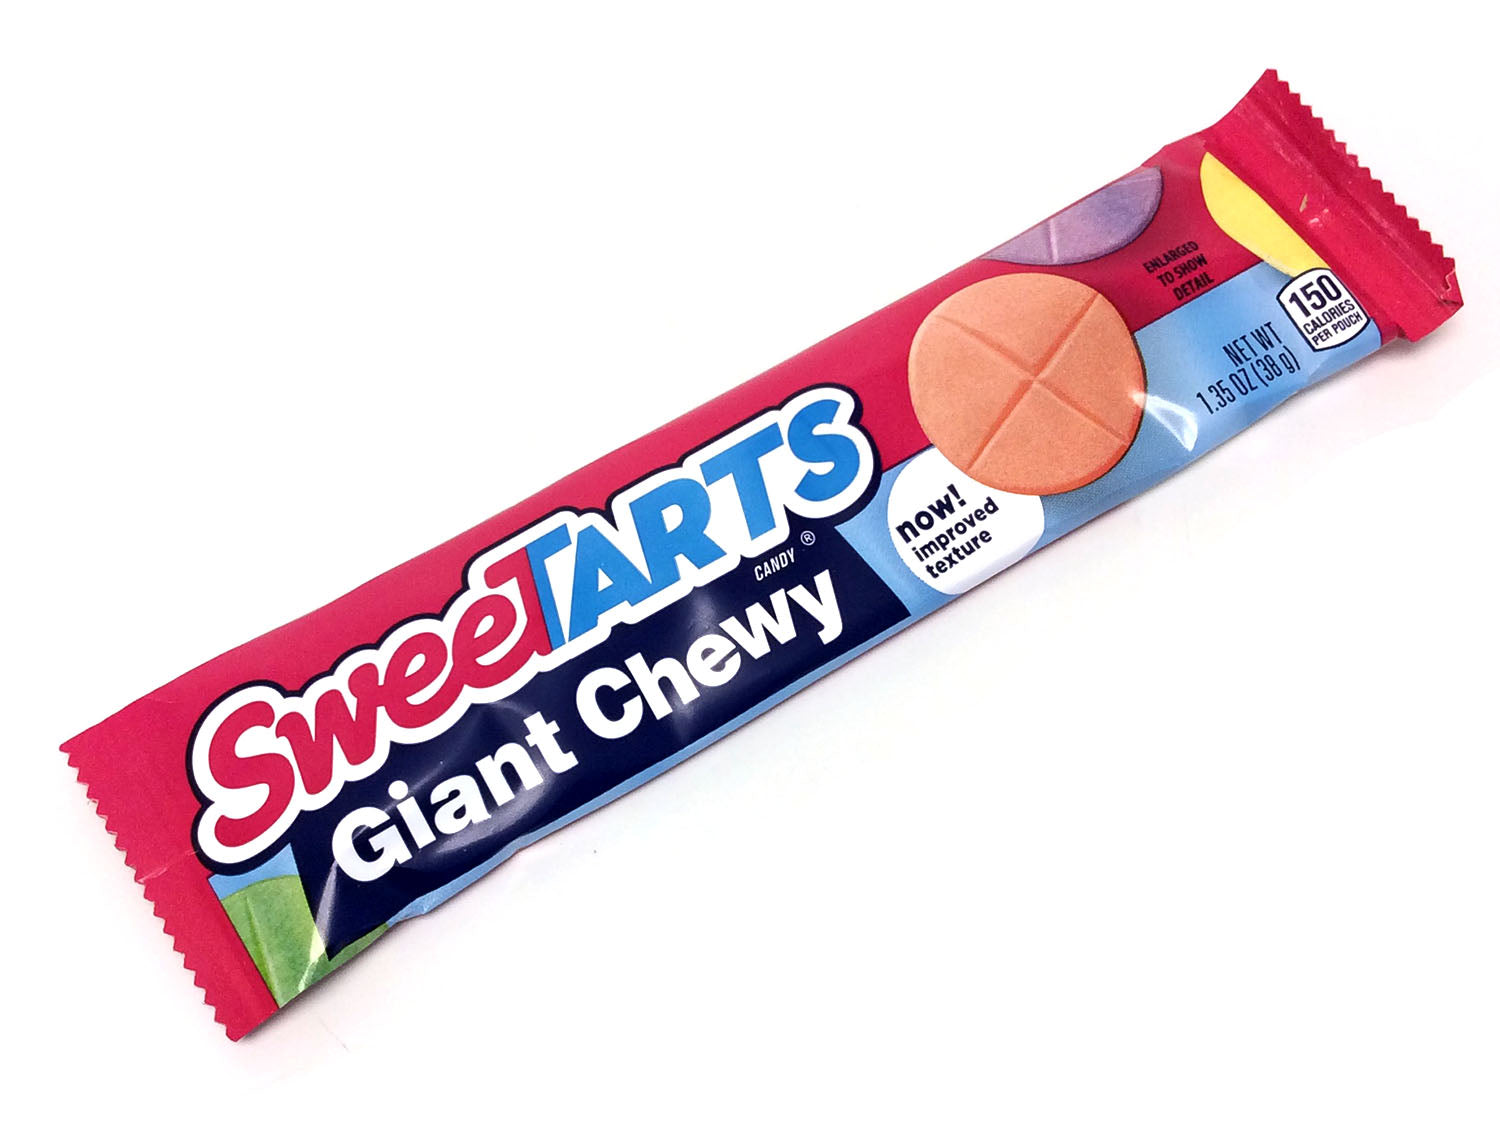 Sweetarts - Sour Chewy Roll